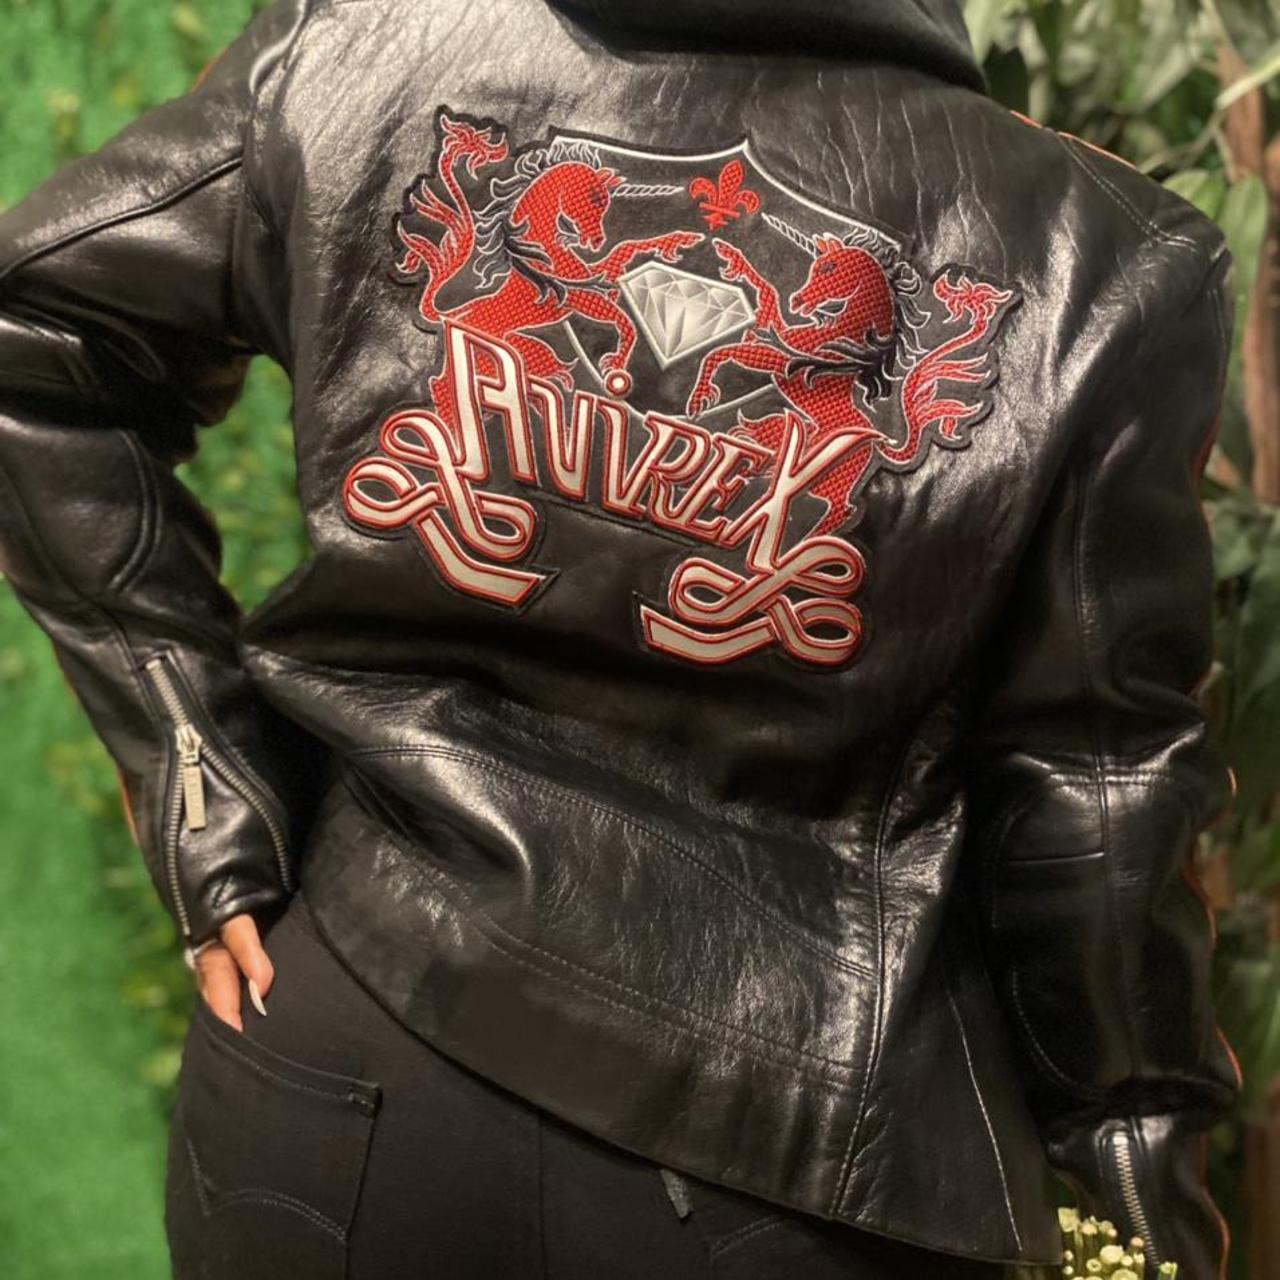 Product Image 1 - Avirex(Vintage) Motorcycle/Biker Jacket

❌Will Not Separate❌

Height: